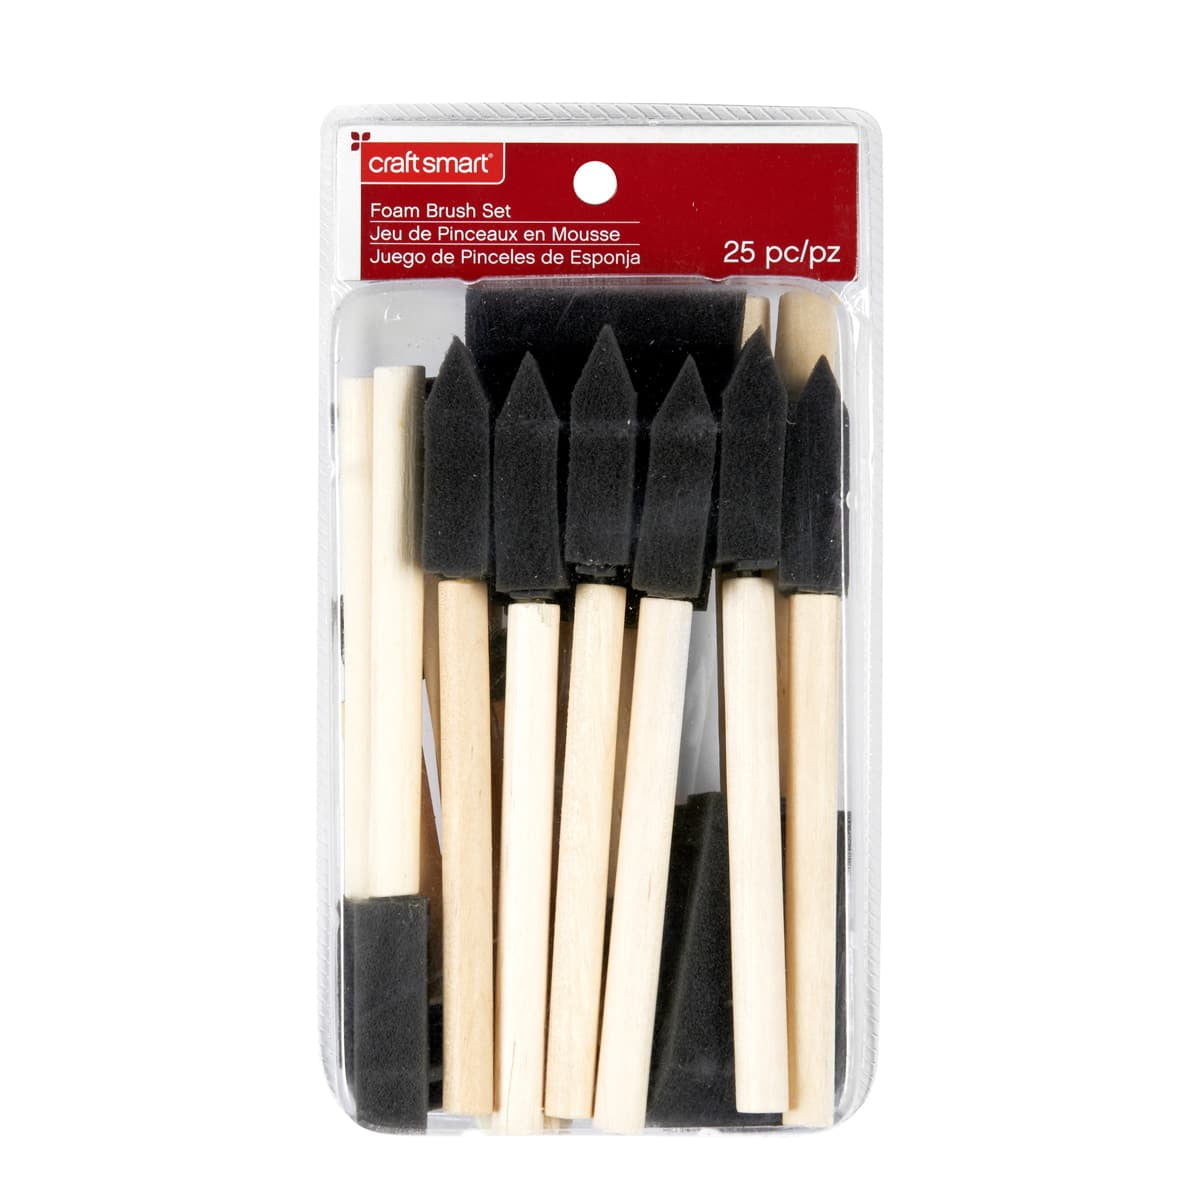 School Smart Beginner Paint Brushes, 7-1/4 x 1/2 Inches, Assorted Colors,  Set of 10